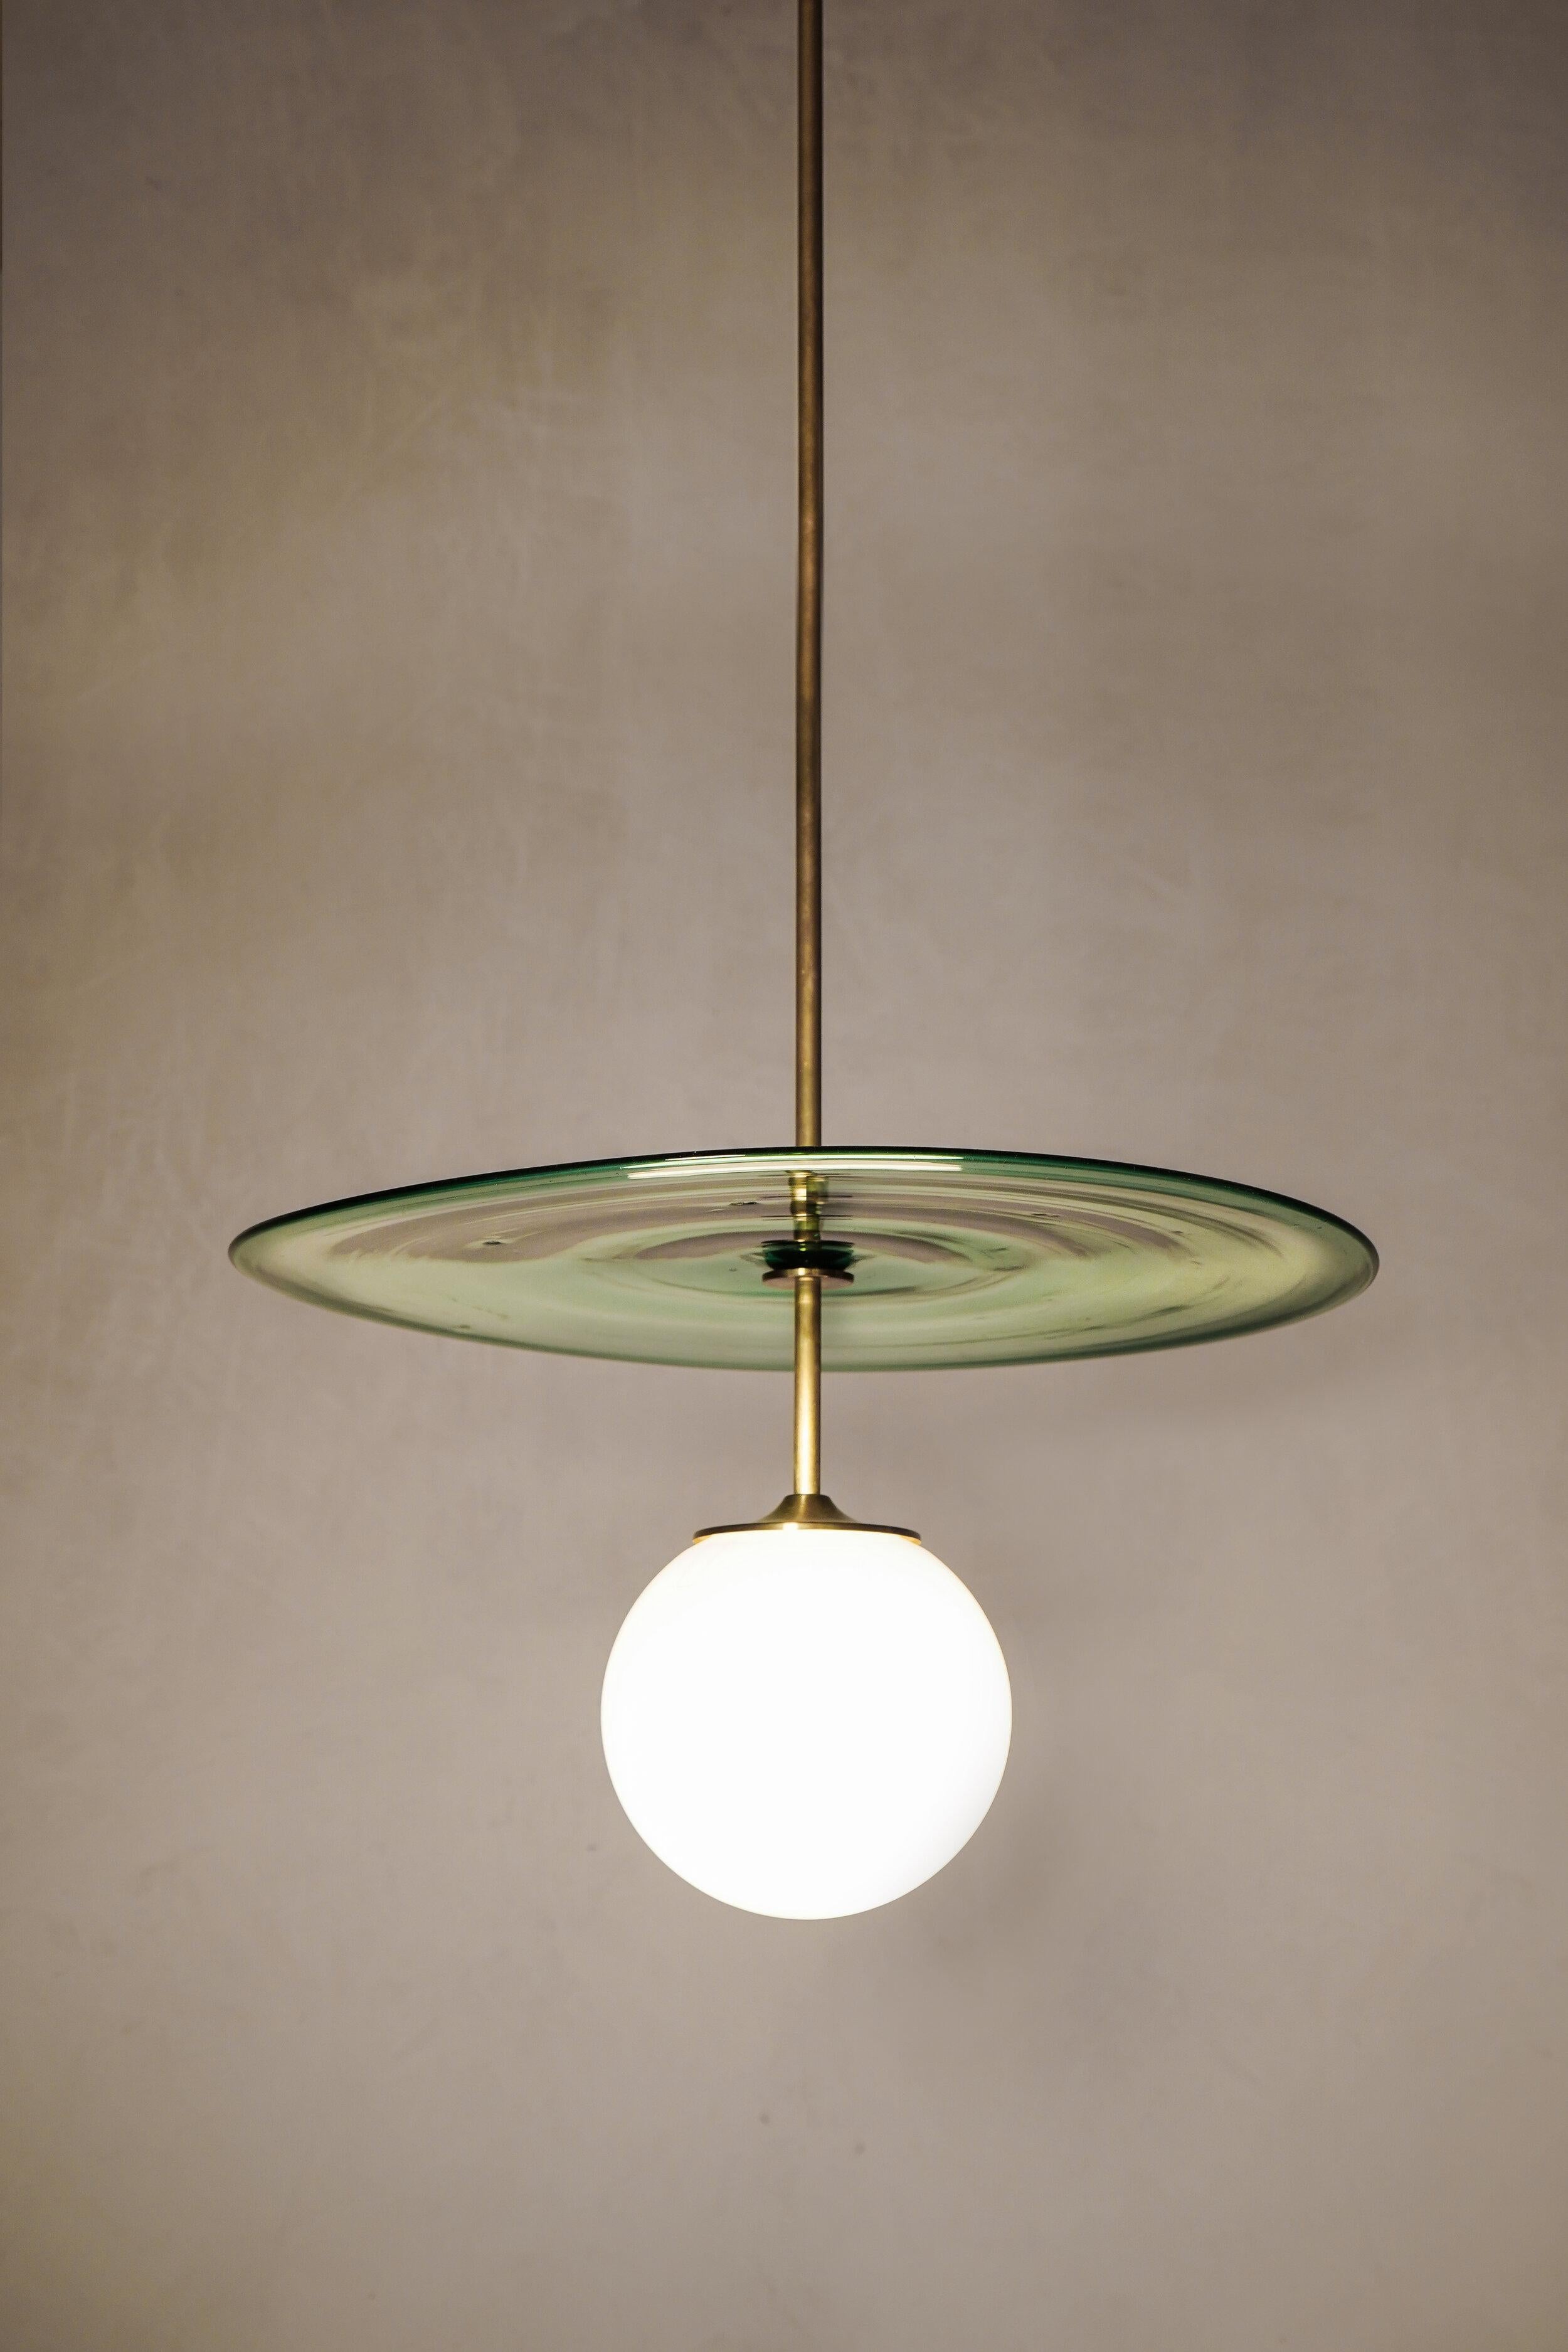 Plat Pendant 45/47 by Contain
Dimensions: Ø 45/7 x H 100 cm (custom length).
Materials: Brass structure, opal glass and blown glass from local production.

Available in different finishes. Available in two diferents diameters: 40/42 cm Ø x